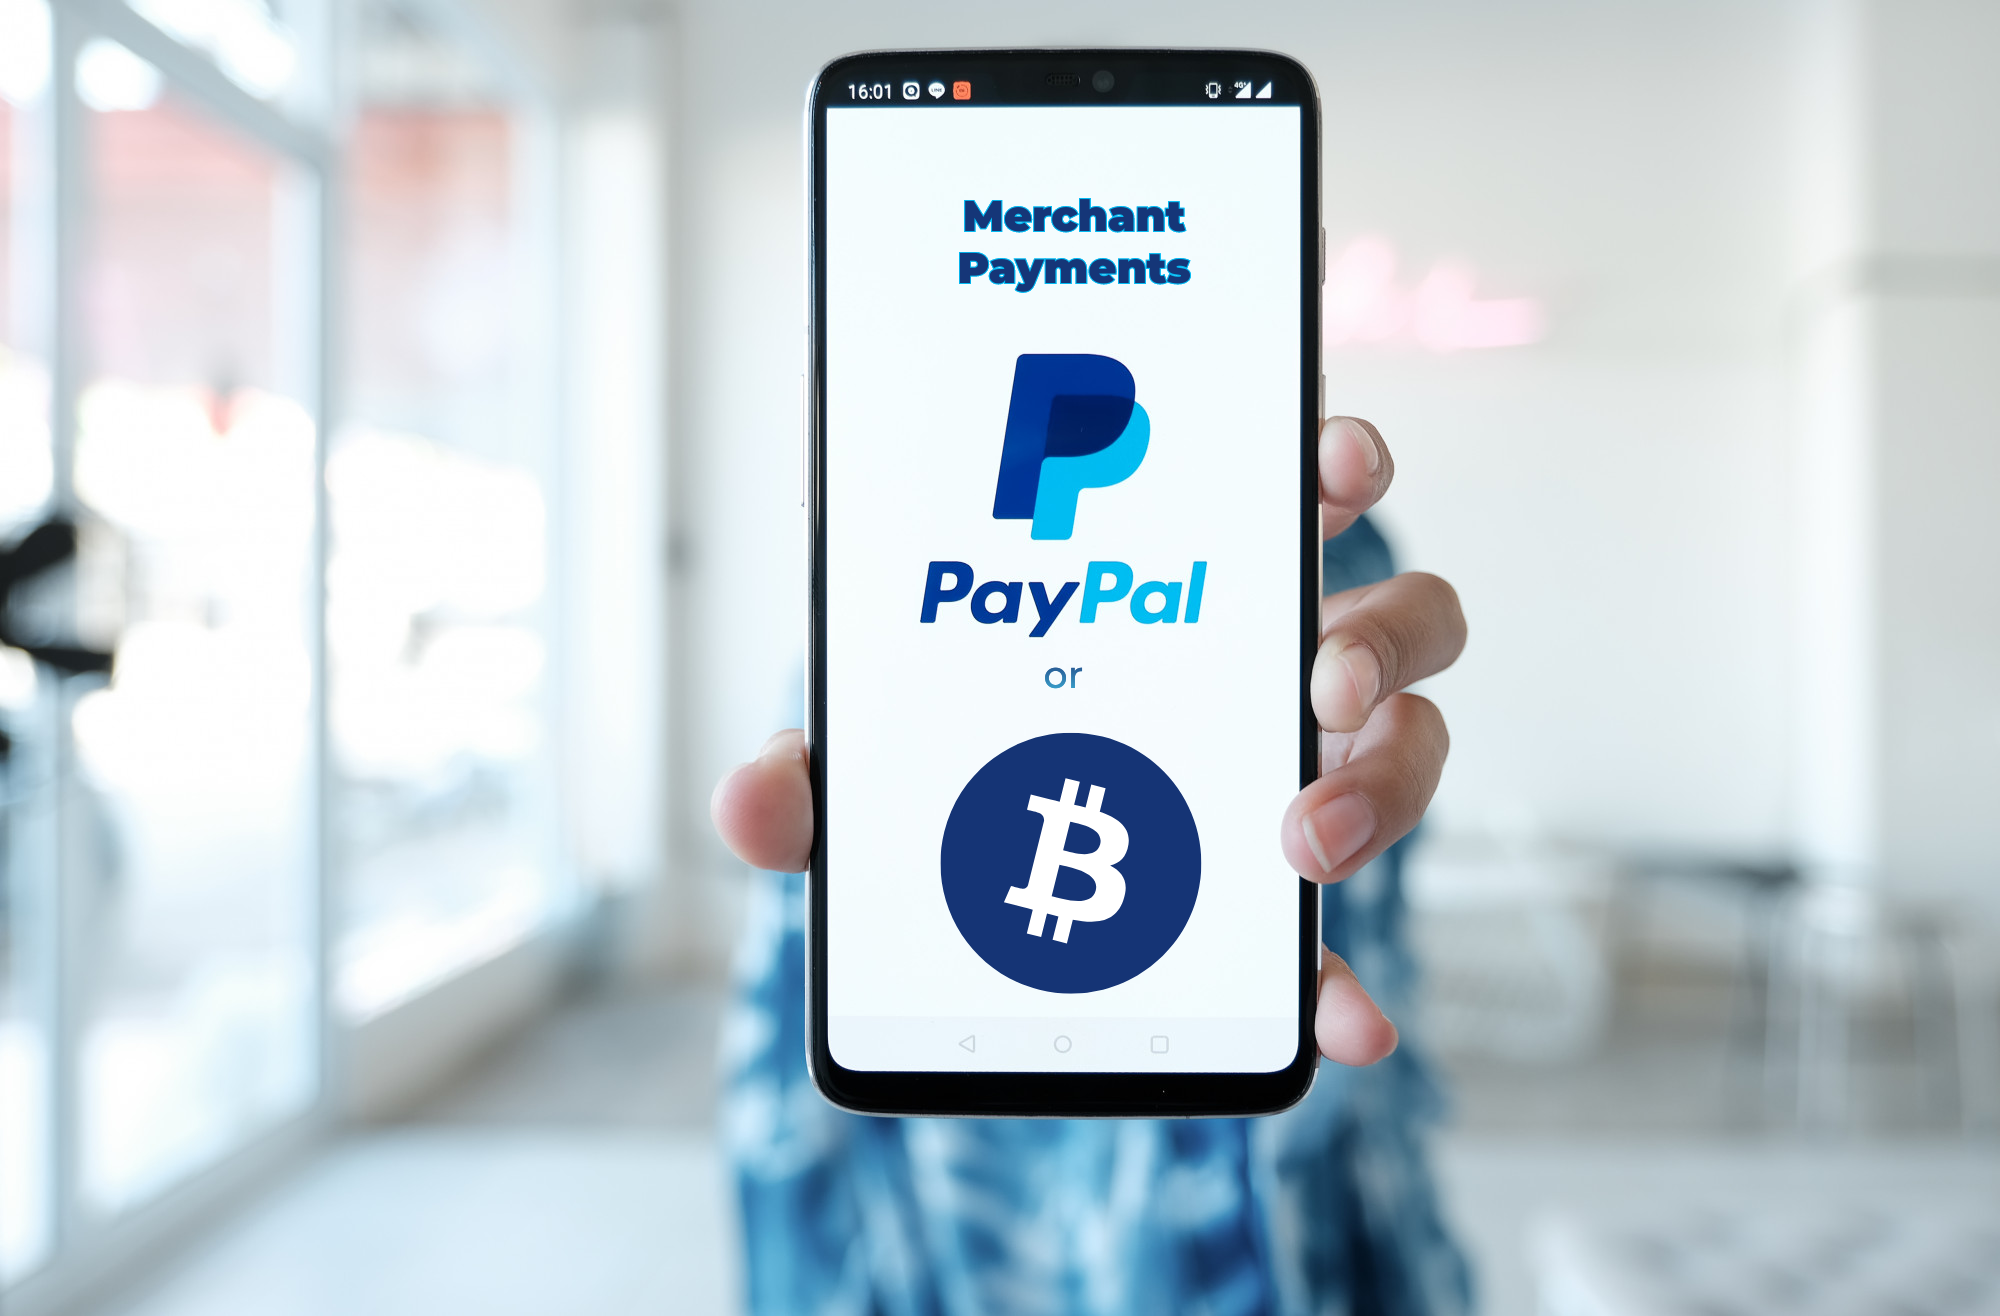 Bitcoin or PayPal: Which is Better for Merchant Payments?